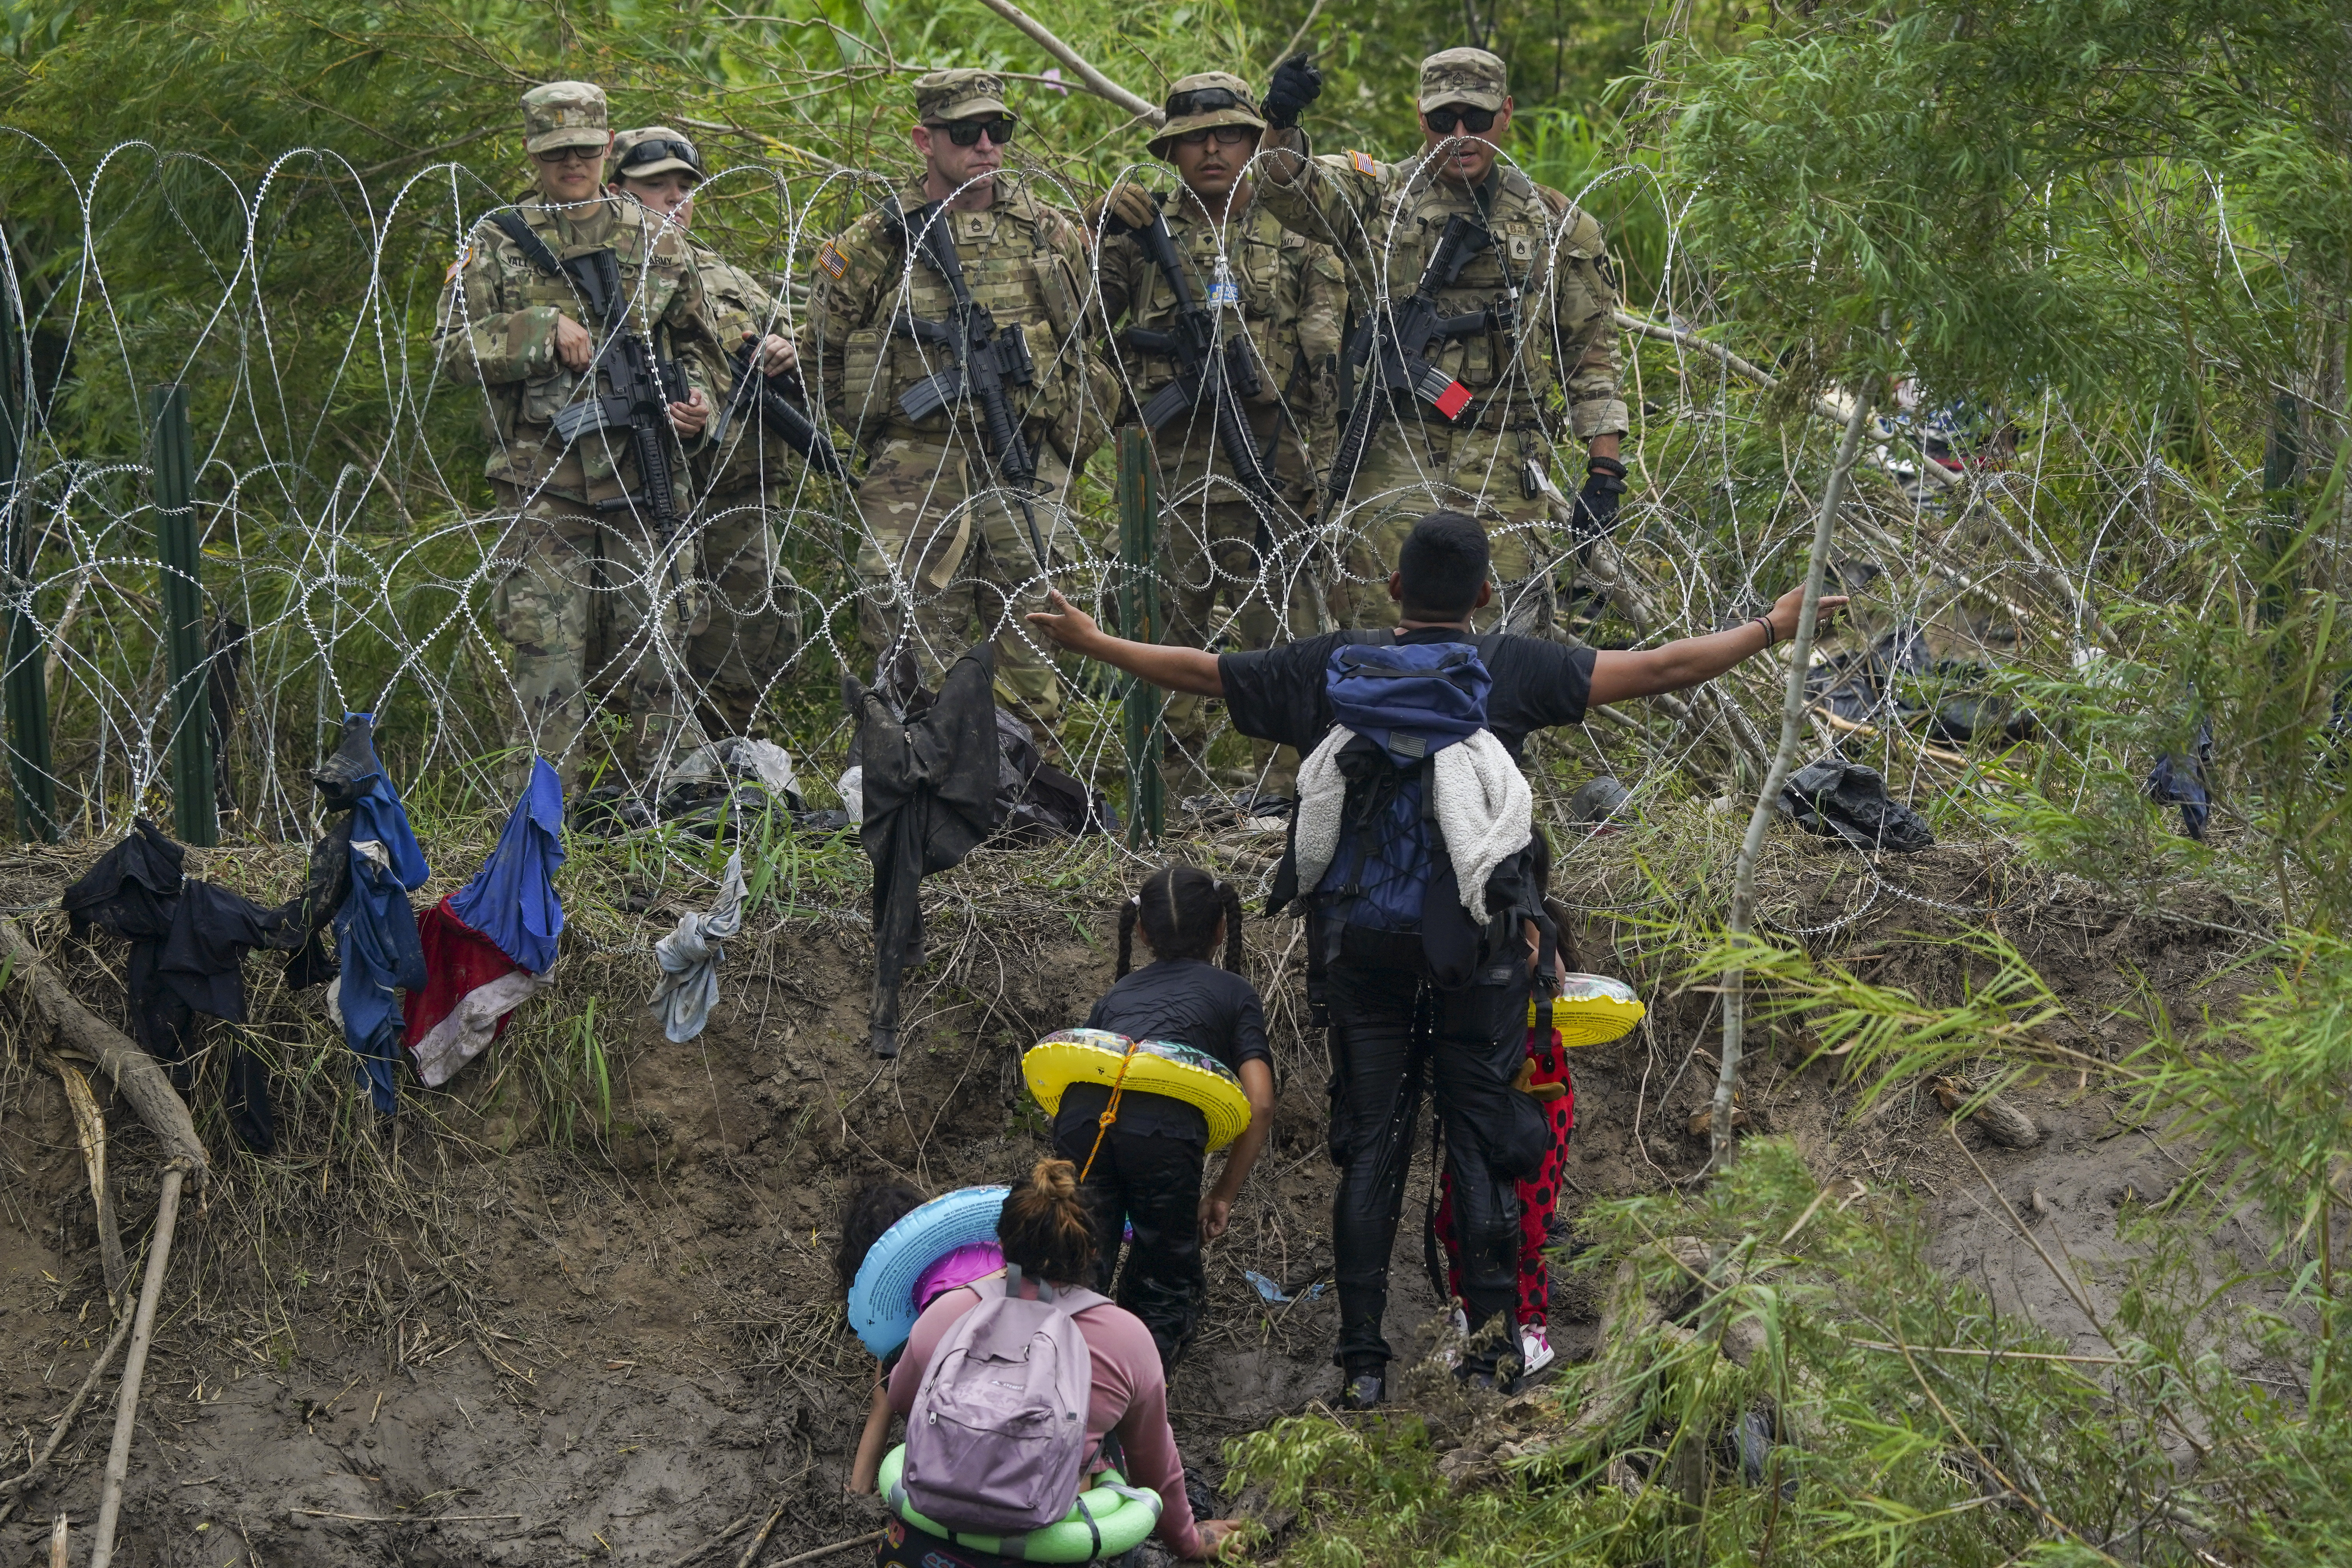 A migrant gestures toward Texas National Guard agents watching from behind barbed wire, on the banks of the Rio Grande, as seen from Matamoros, Mexico, on May 11, 2023. US President Joe Biden's administration has introduced stricter measures to replace Title 42, which since March 2020 has allowed border authorities to quickly expel migrants across the border to prevent the spread of COVID-19.  (AP Photo/Fernando Llano)